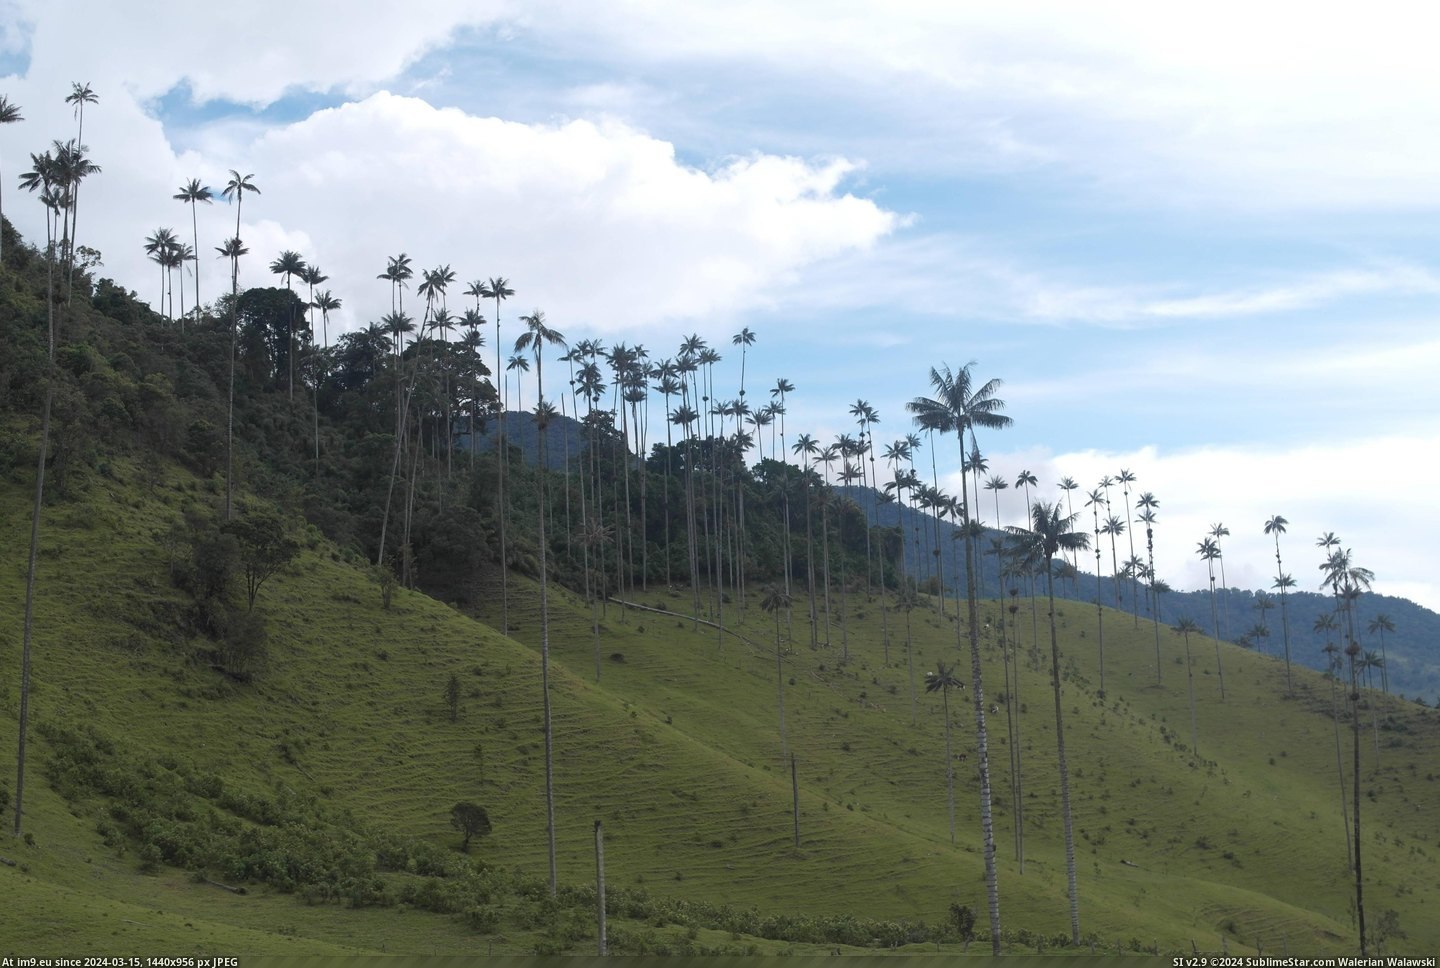 #Picture #Died #Colombia #Camera [Earthporn]  Valle de Cocora, Colombia. Last picture I took before my camera died. [4378x2918] Pic. (Изображение из альбом My r/EARTHPORN favs))